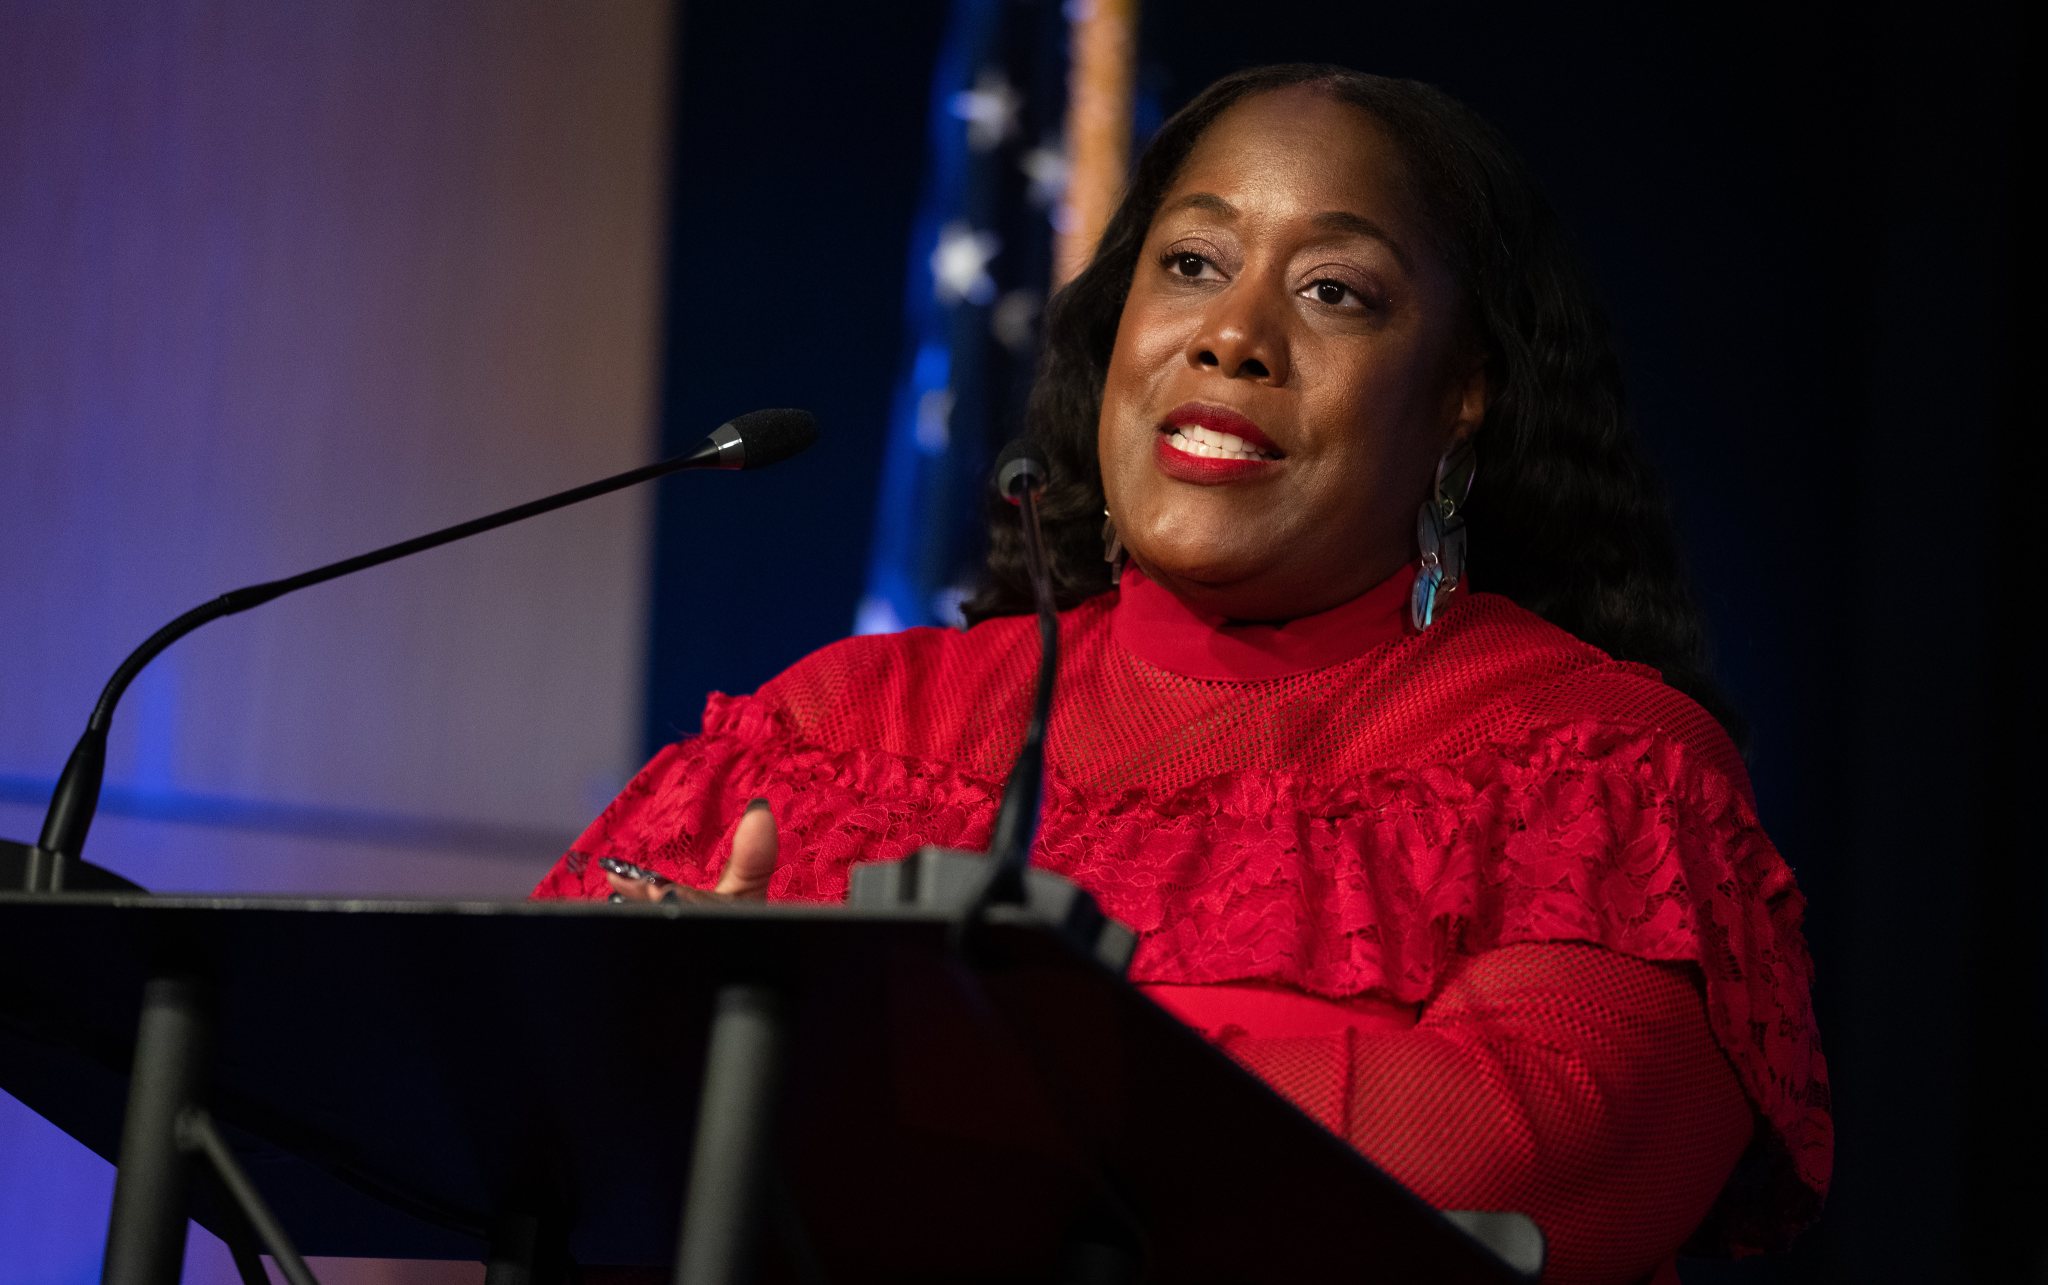 Michelle Jones stands at a lectern and speaks against an illuminated black and dark blue background. She wears a red blouse and iridescent earrings. An American flag is out of focus immediately behind her.